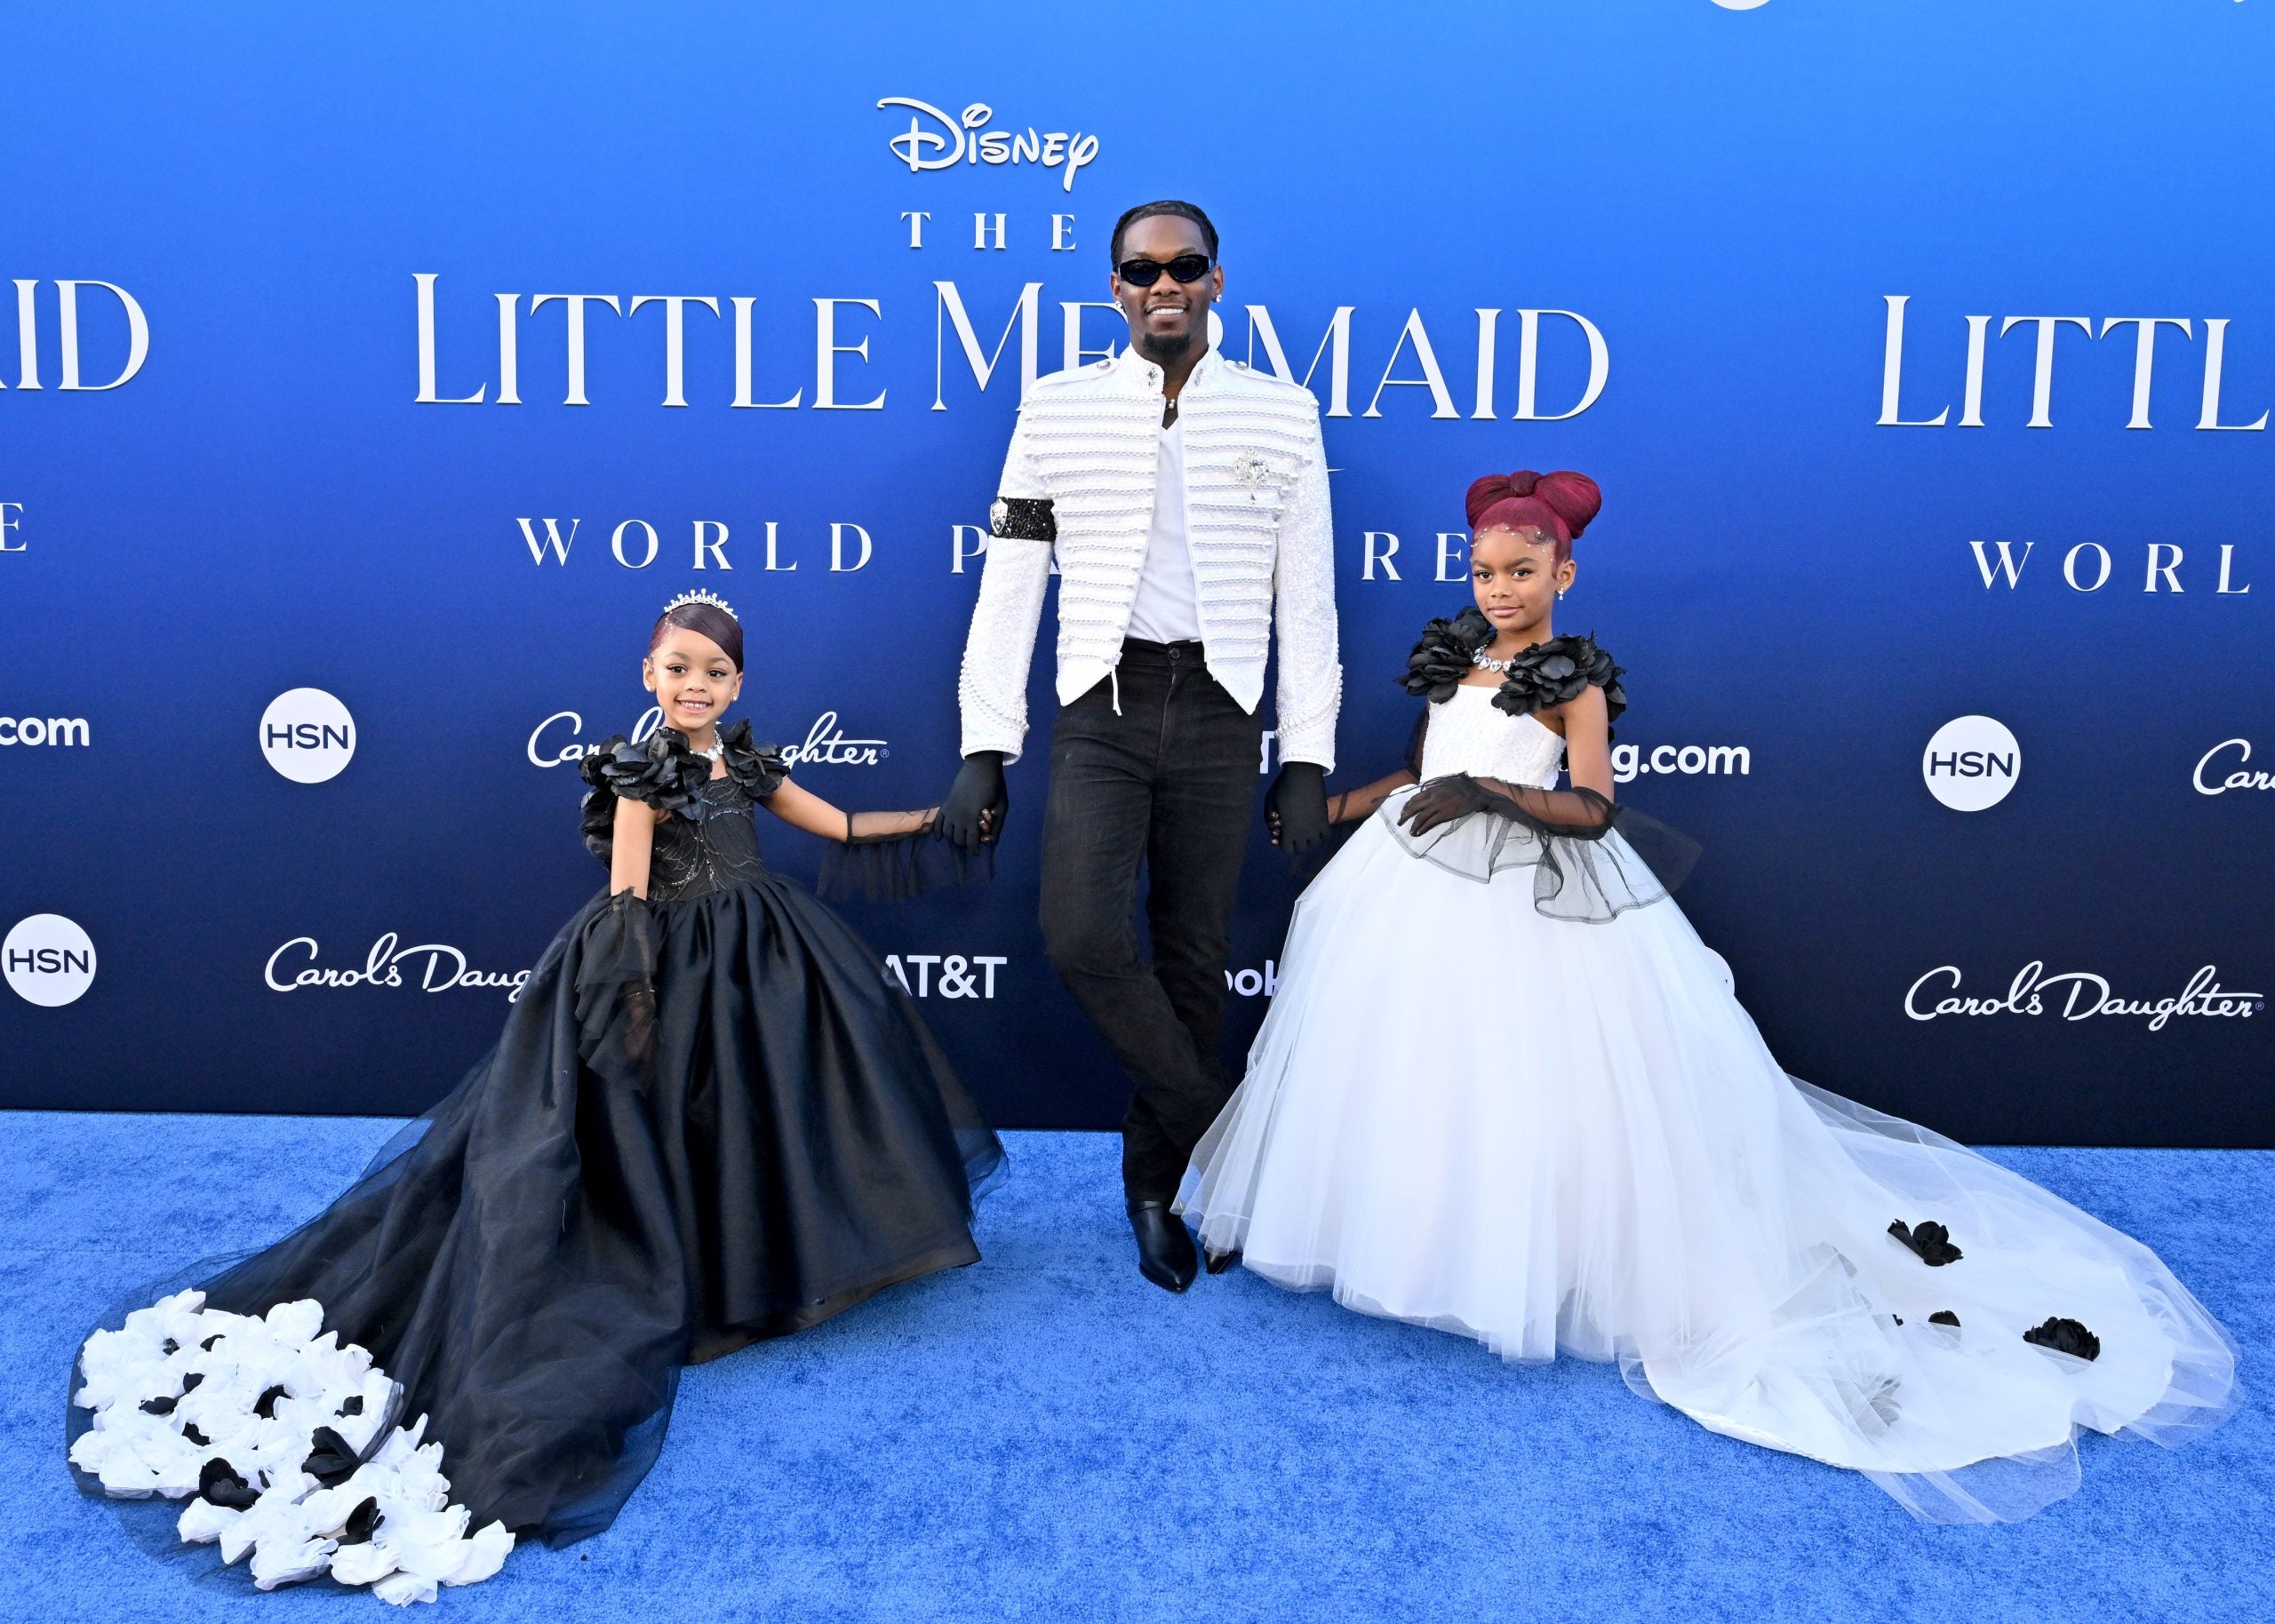 It Was A Family Affair At 'The Little Mermaid' Premiere For These Celebrity Parents And Their Daughters